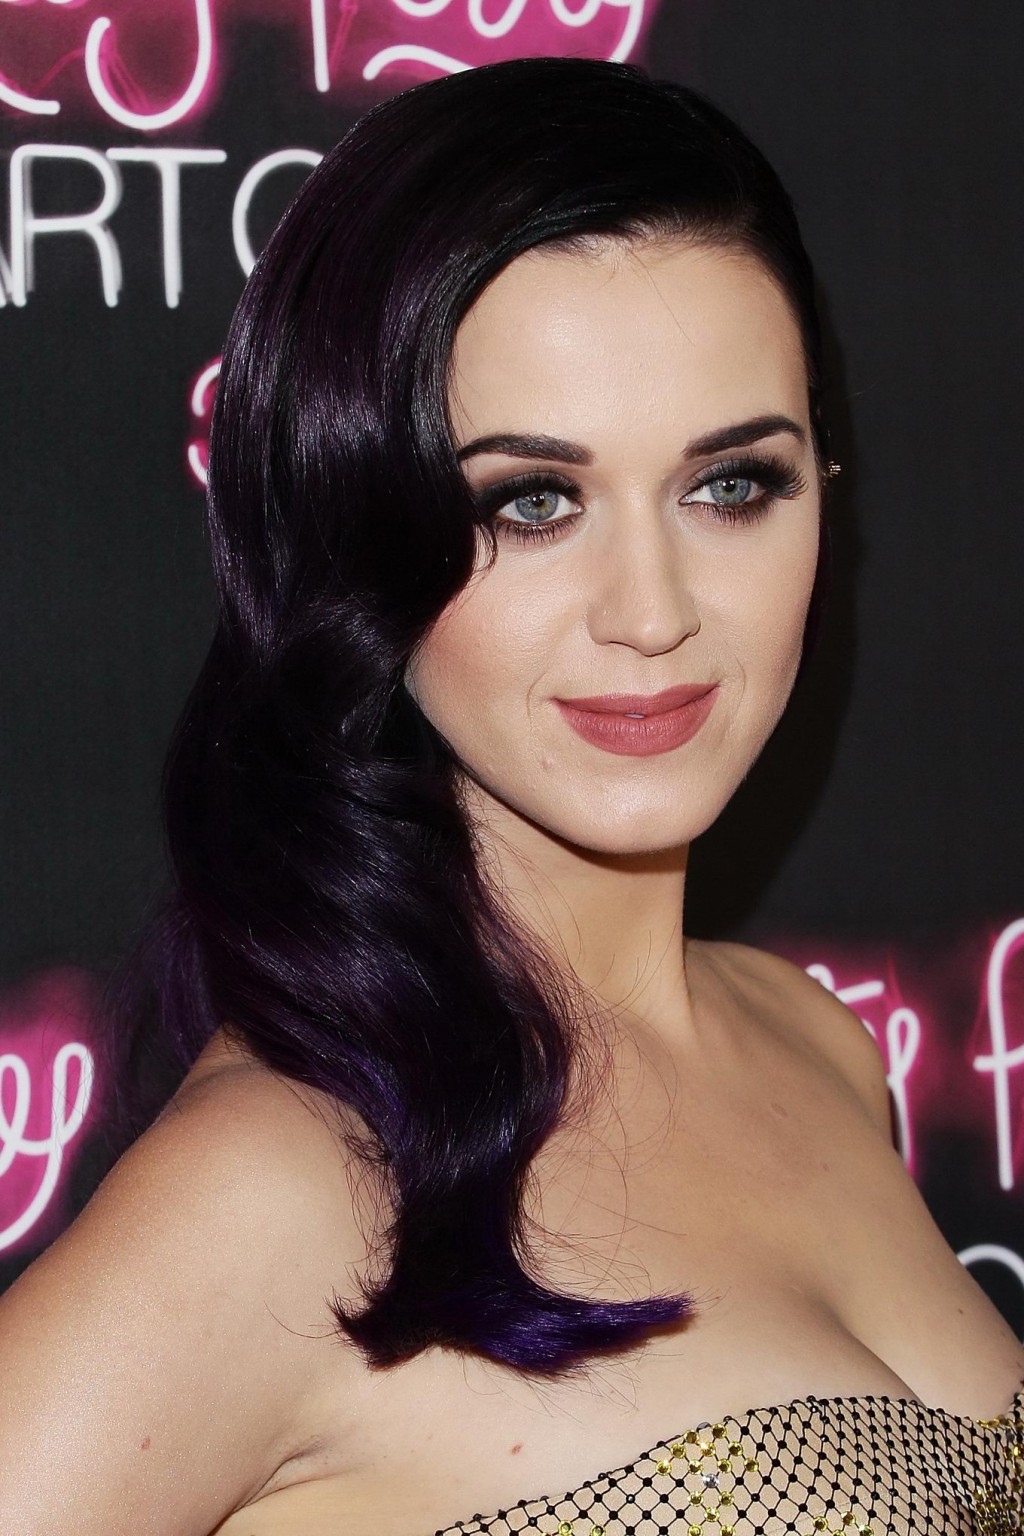 Katy Perry showing cleavage at 'Katy Perry: Part of Me' premiere in Sydney #75258559